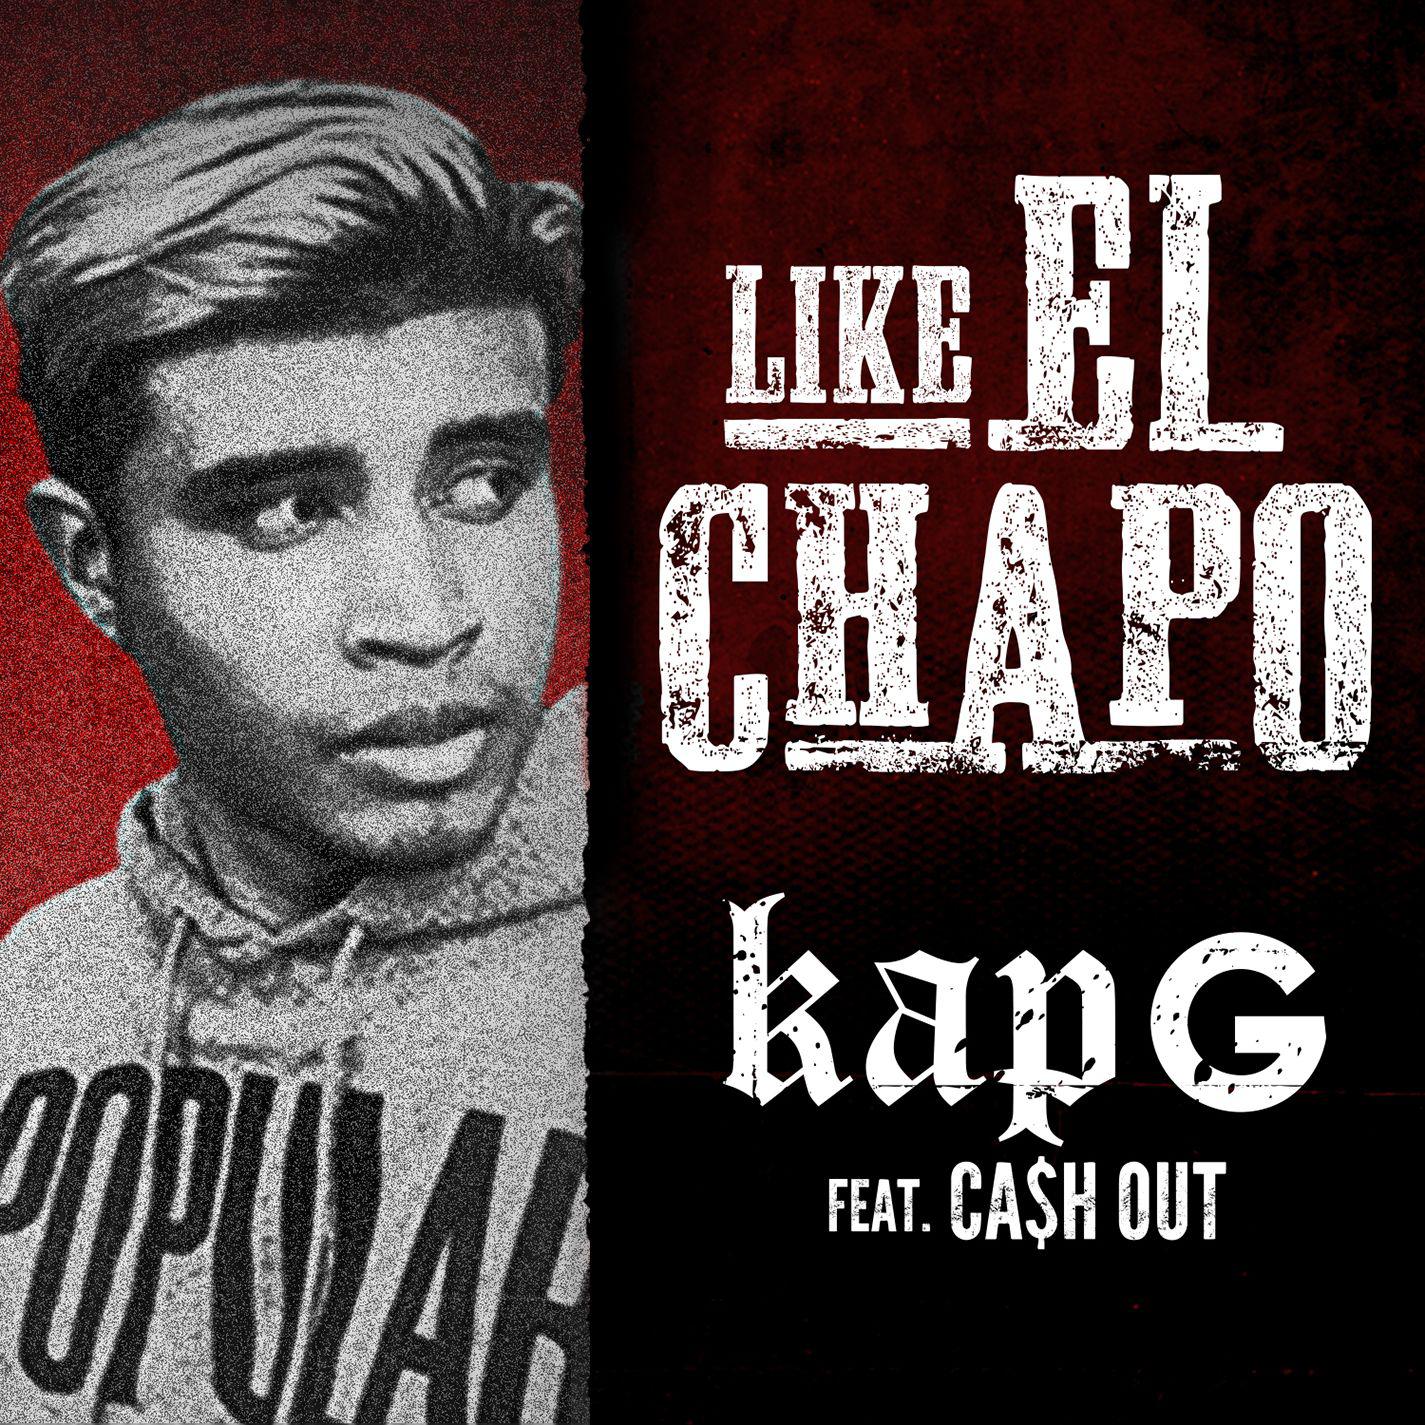 Like El Chapo (feat. Ca$h Out)